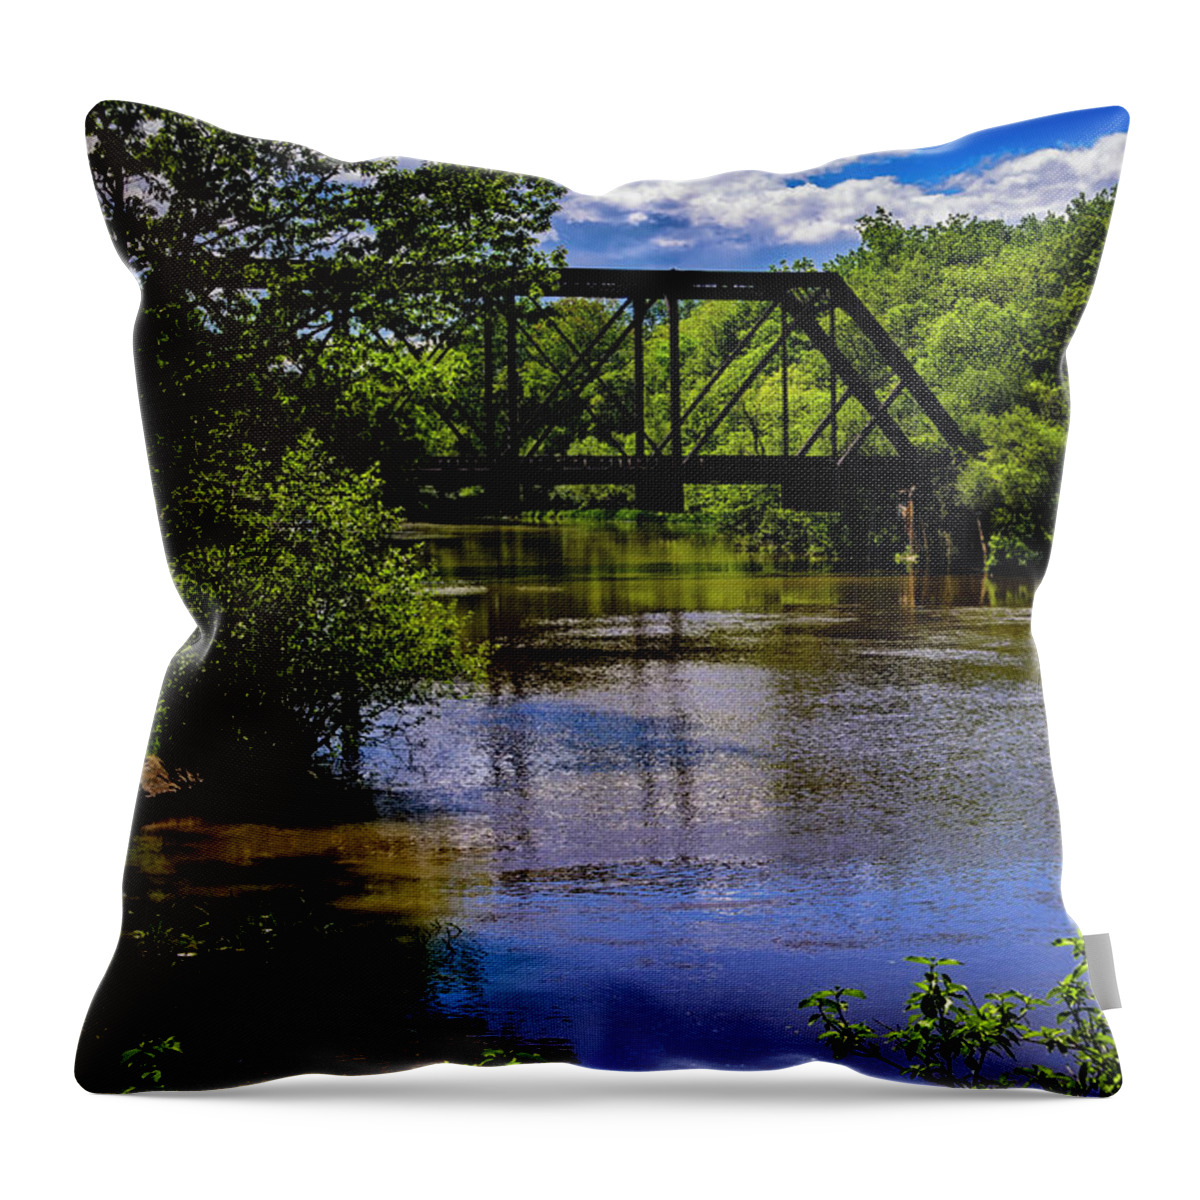 Interior Decor Throw Pillow featuring the photograph Trestle Over River by Mark Myhaver